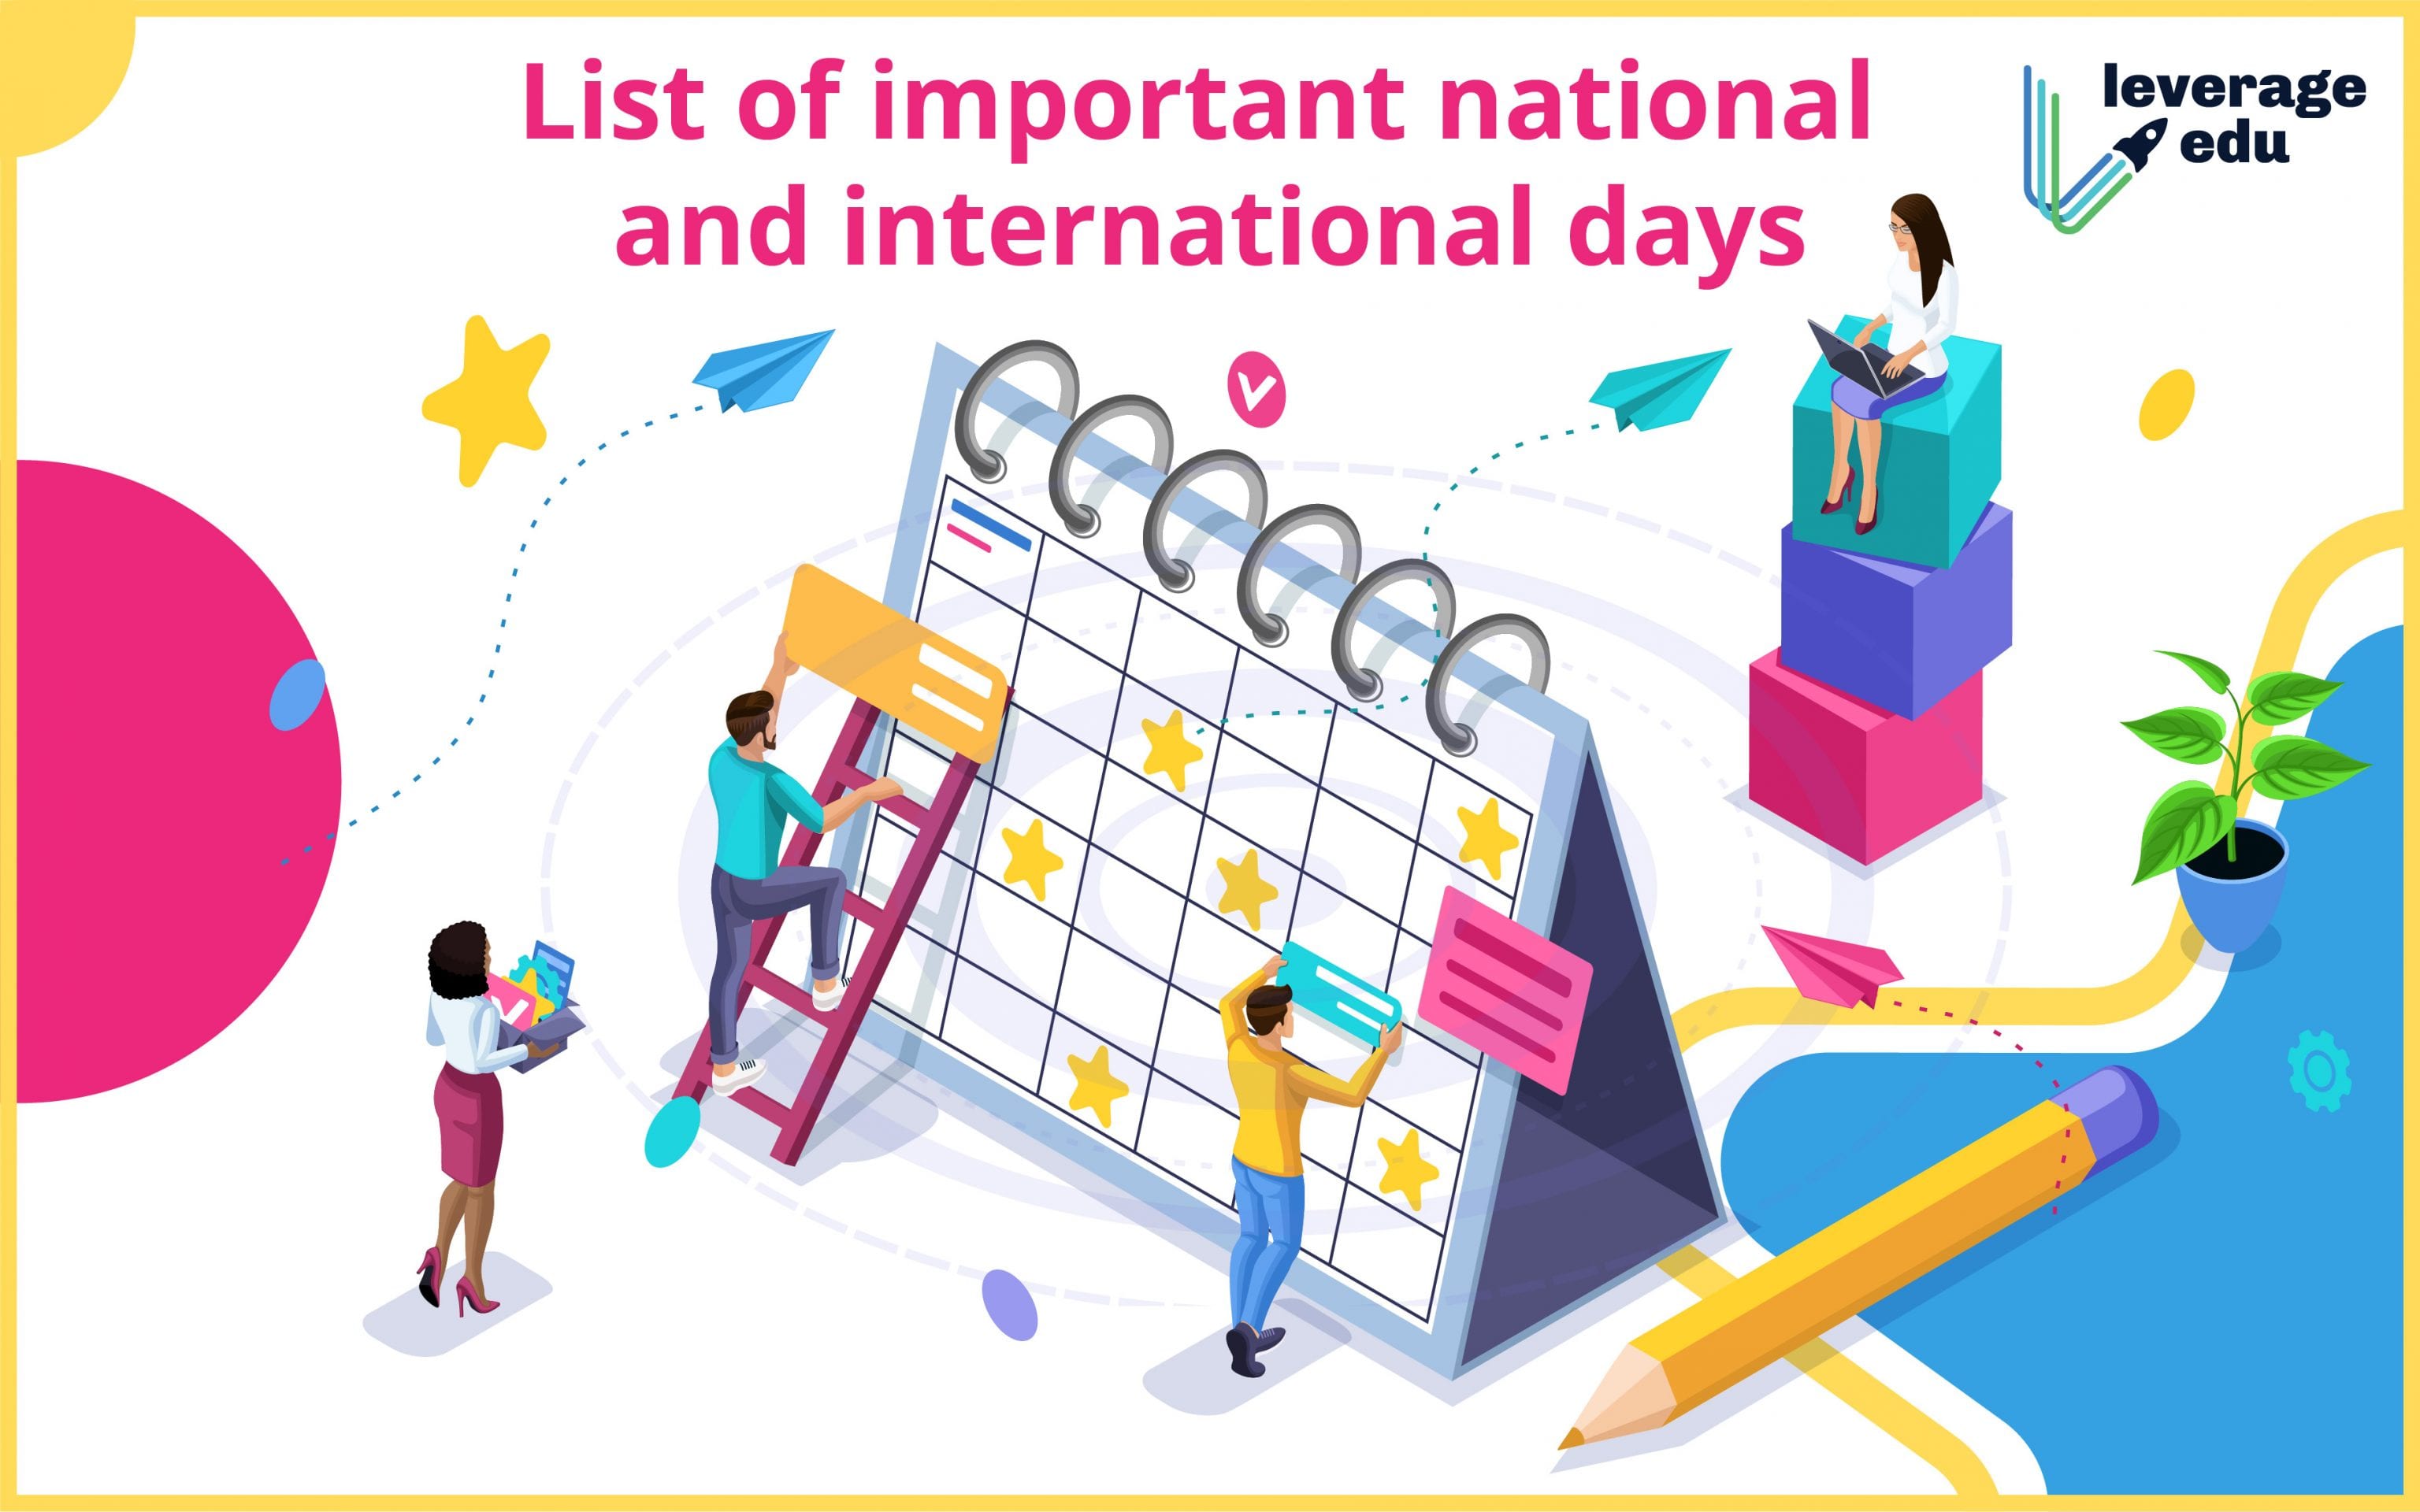 List of Important National and International Days in 2021 Top